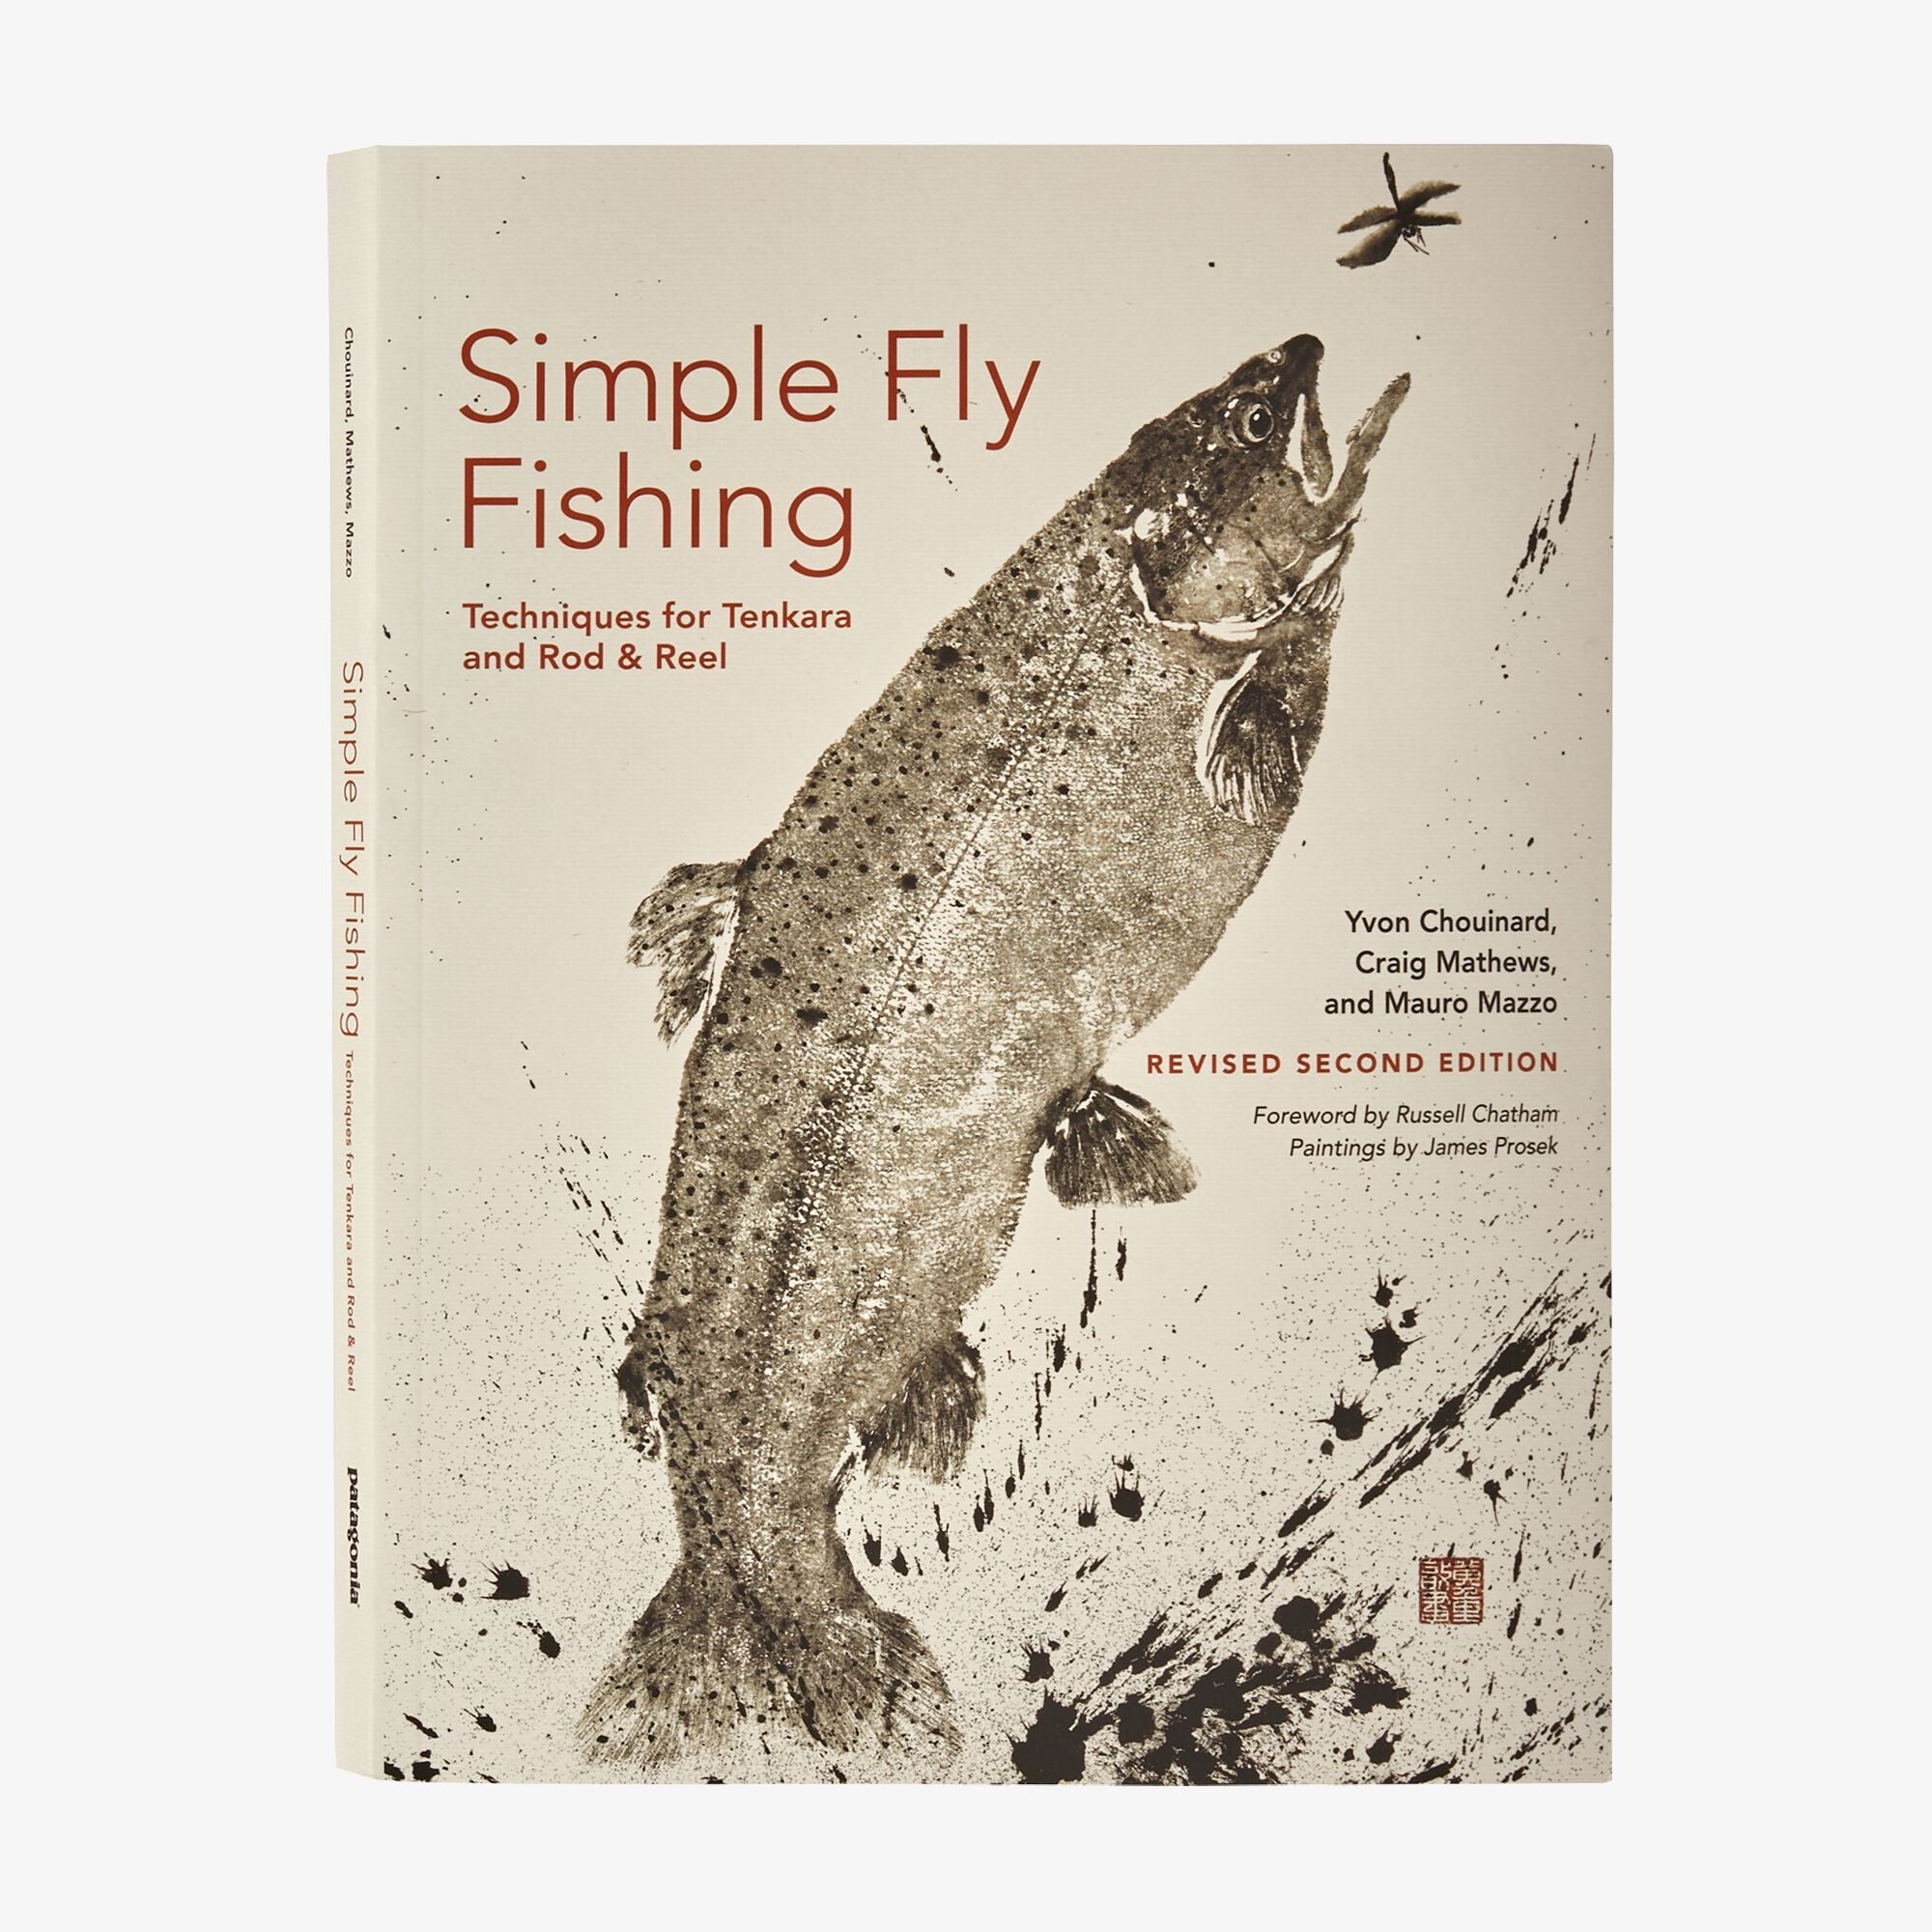 Simple Fly Fishing Revised Second Edition: Techniques for Tenkara and Rod & Reel (Patagonia paperback)